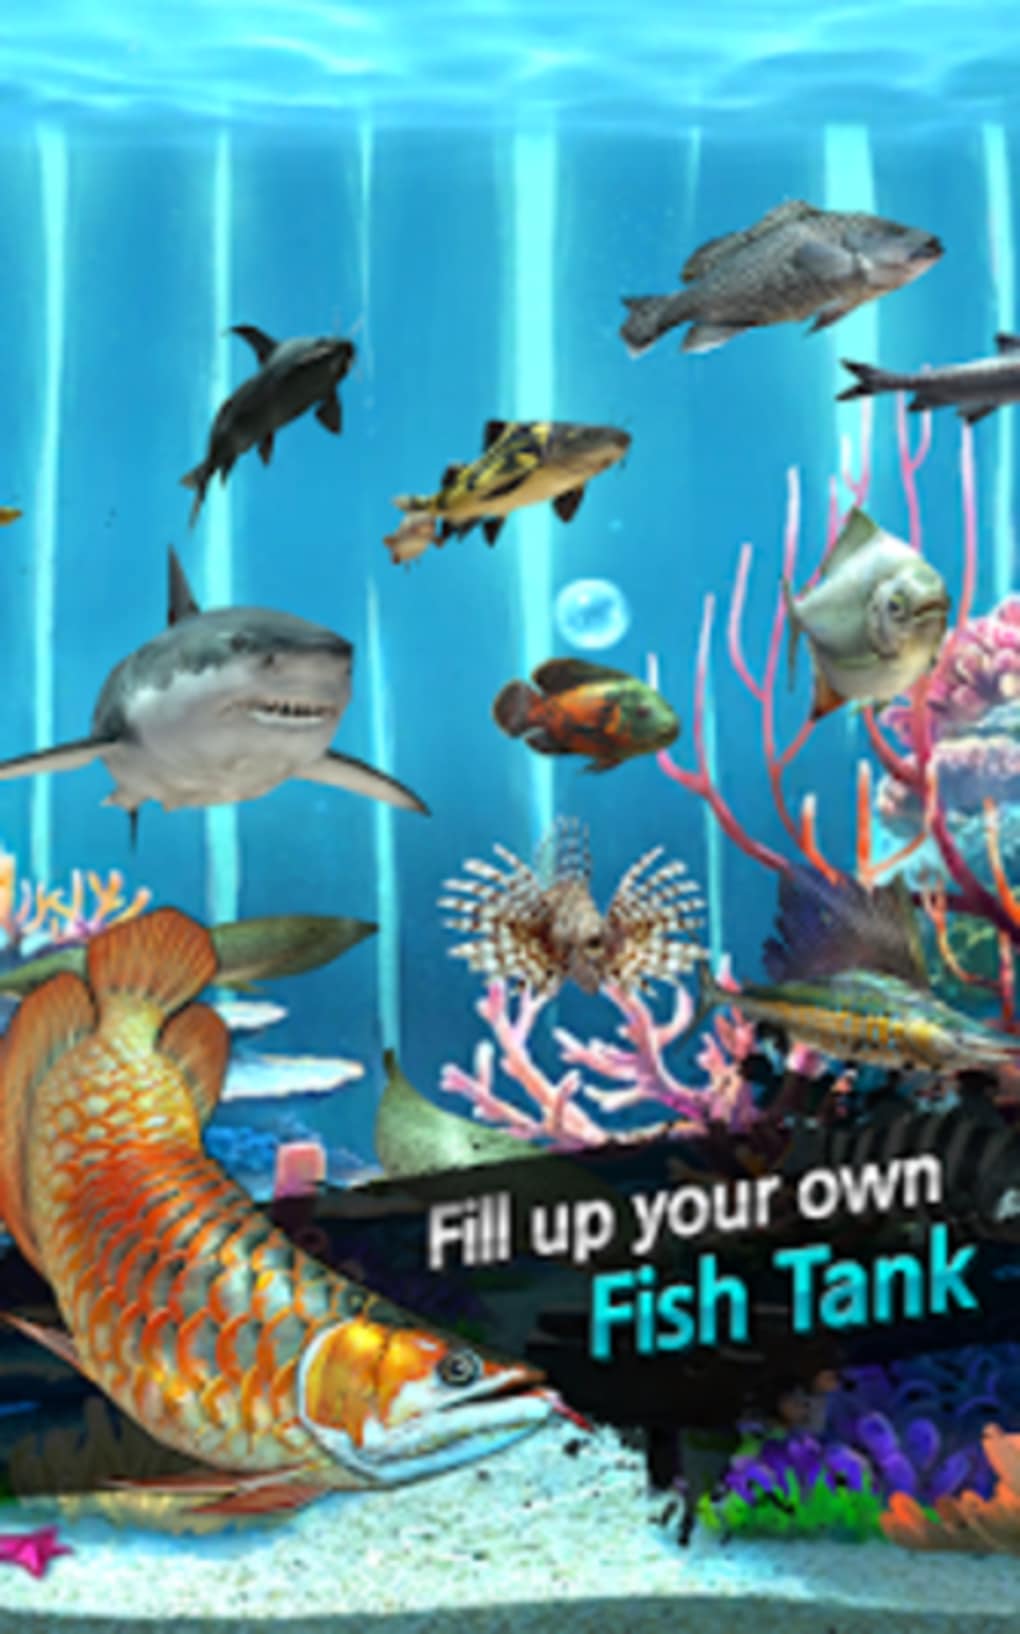 Ace Fishing: Wild Catch 4.0.1 APK Download